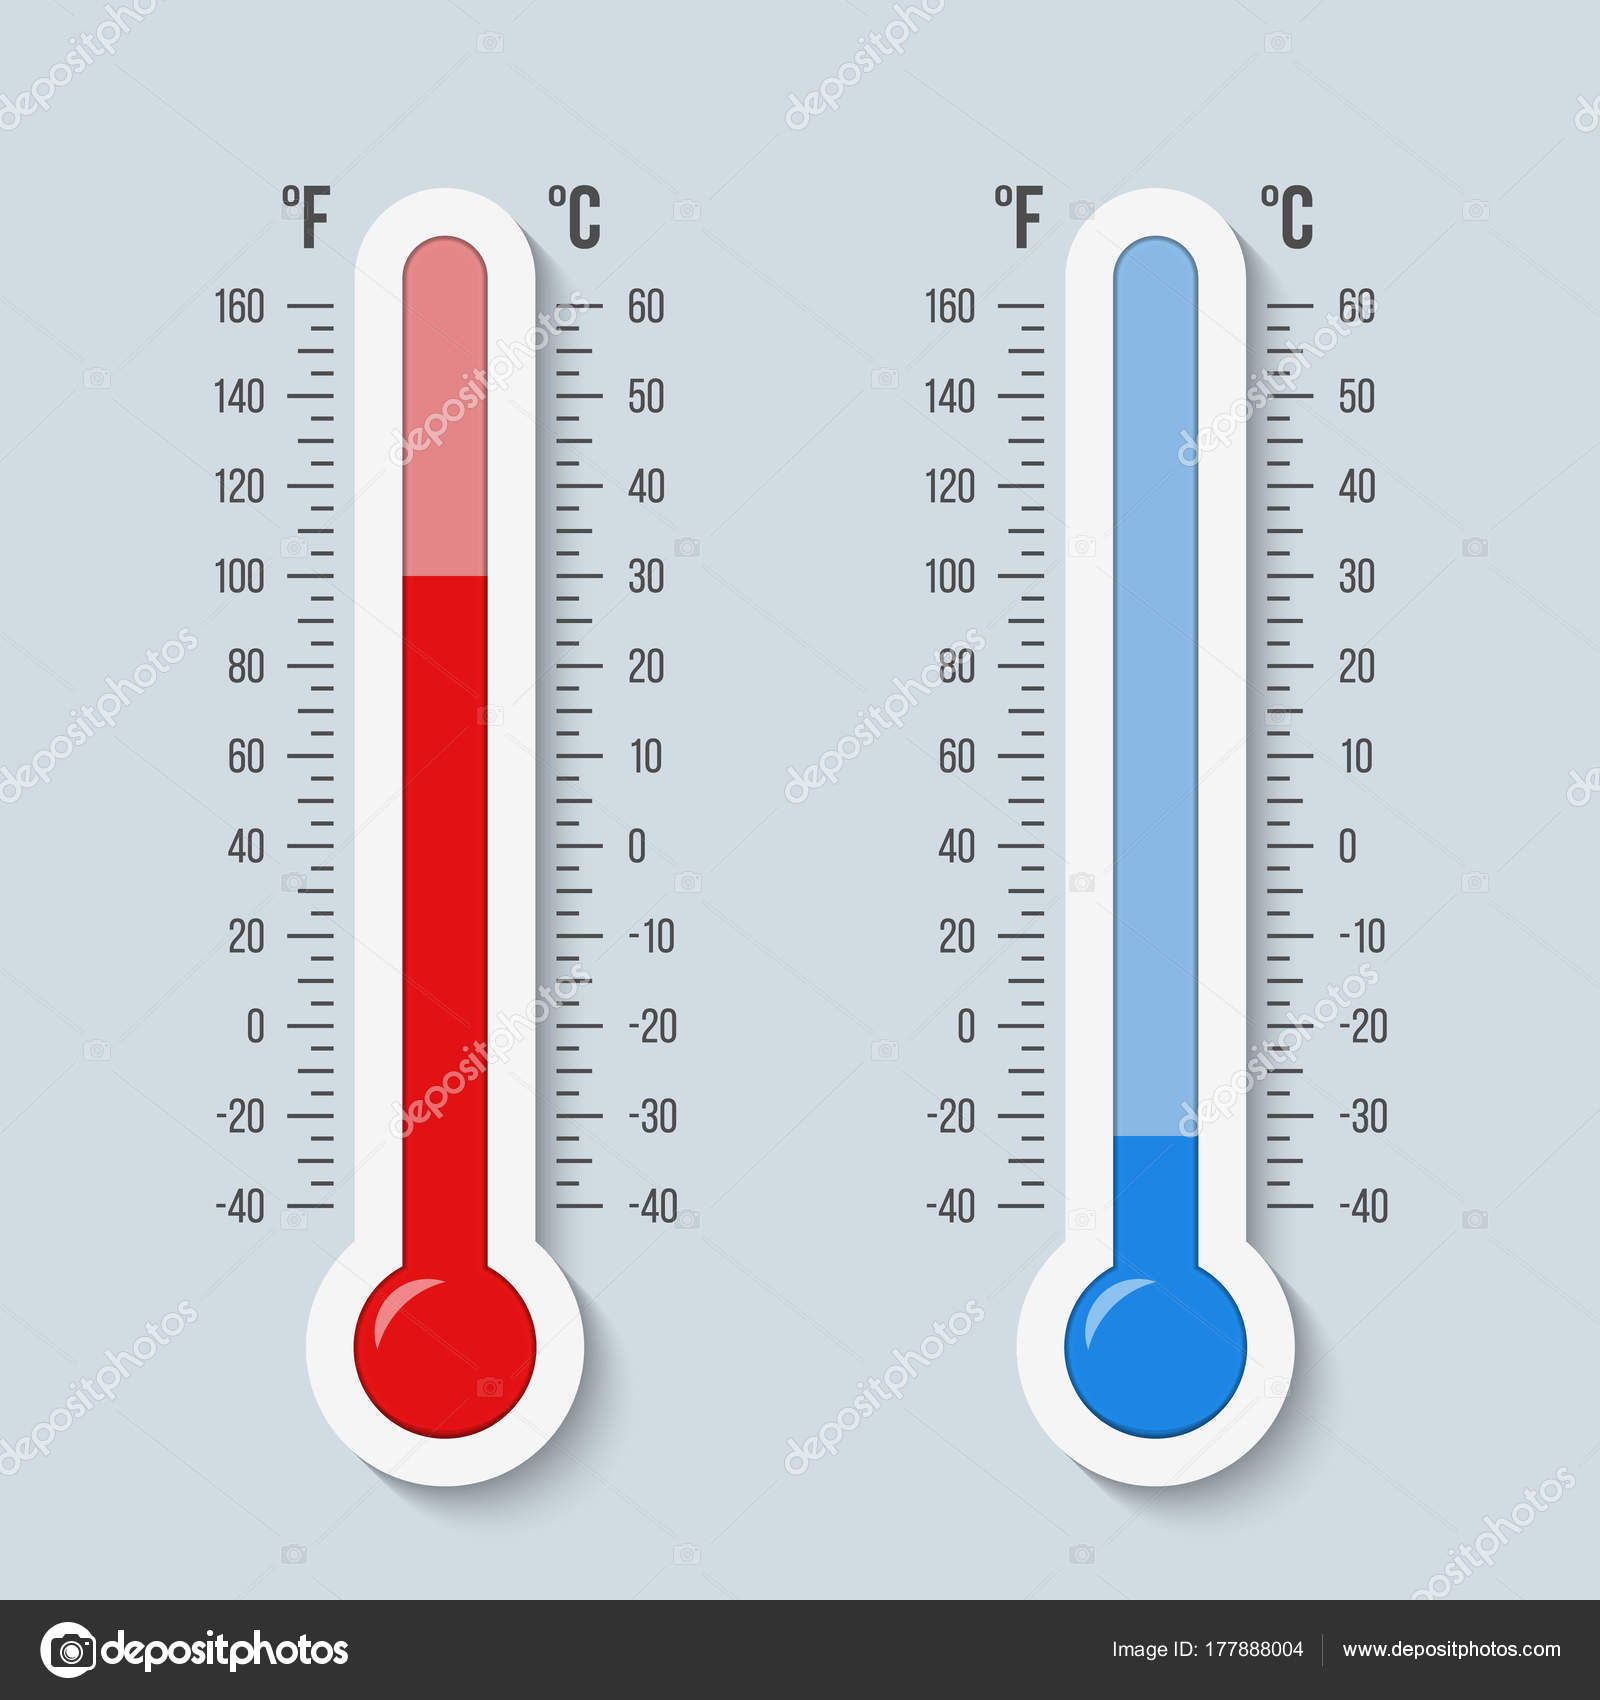 Temperature weather thermometers with Celsius and Fahrenheit